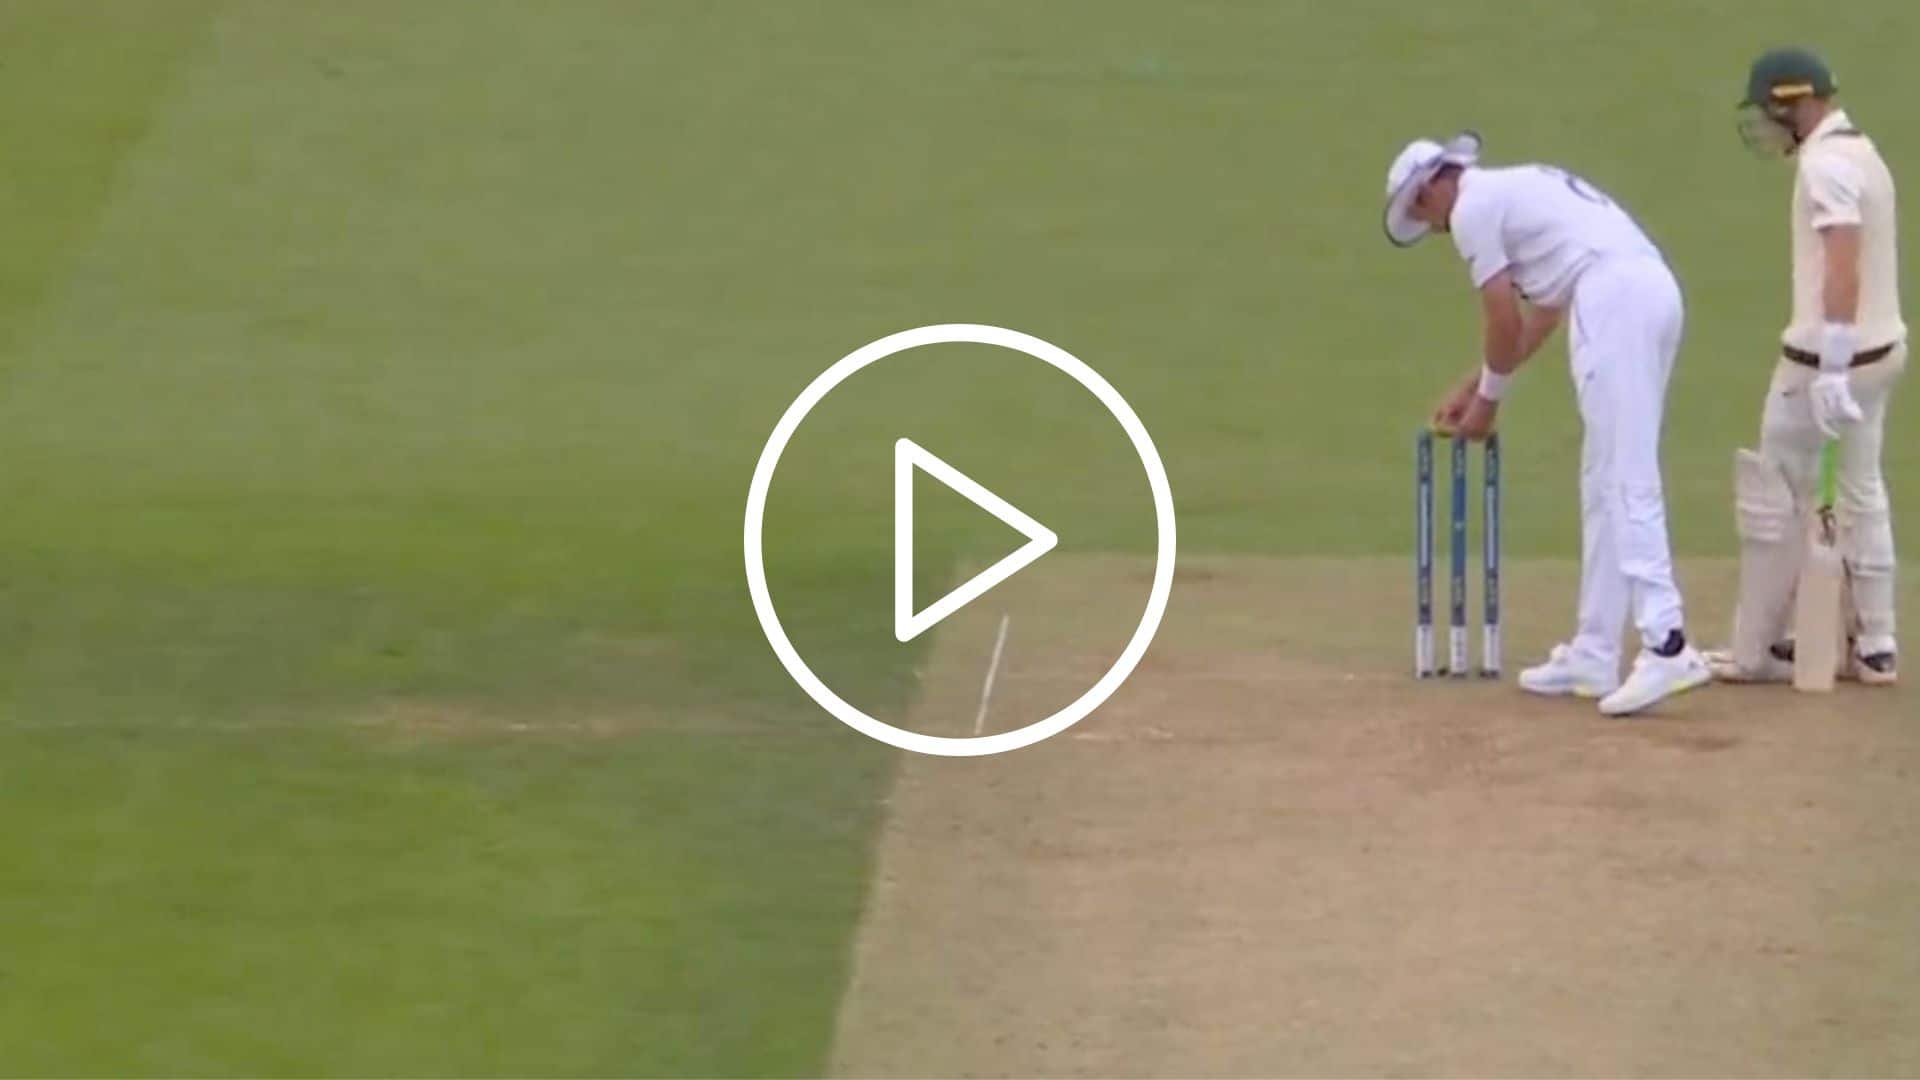 [Watch] Stuart Broad's Incredible Mind Game To Sent Marnus Labuschagne Back In The Hut